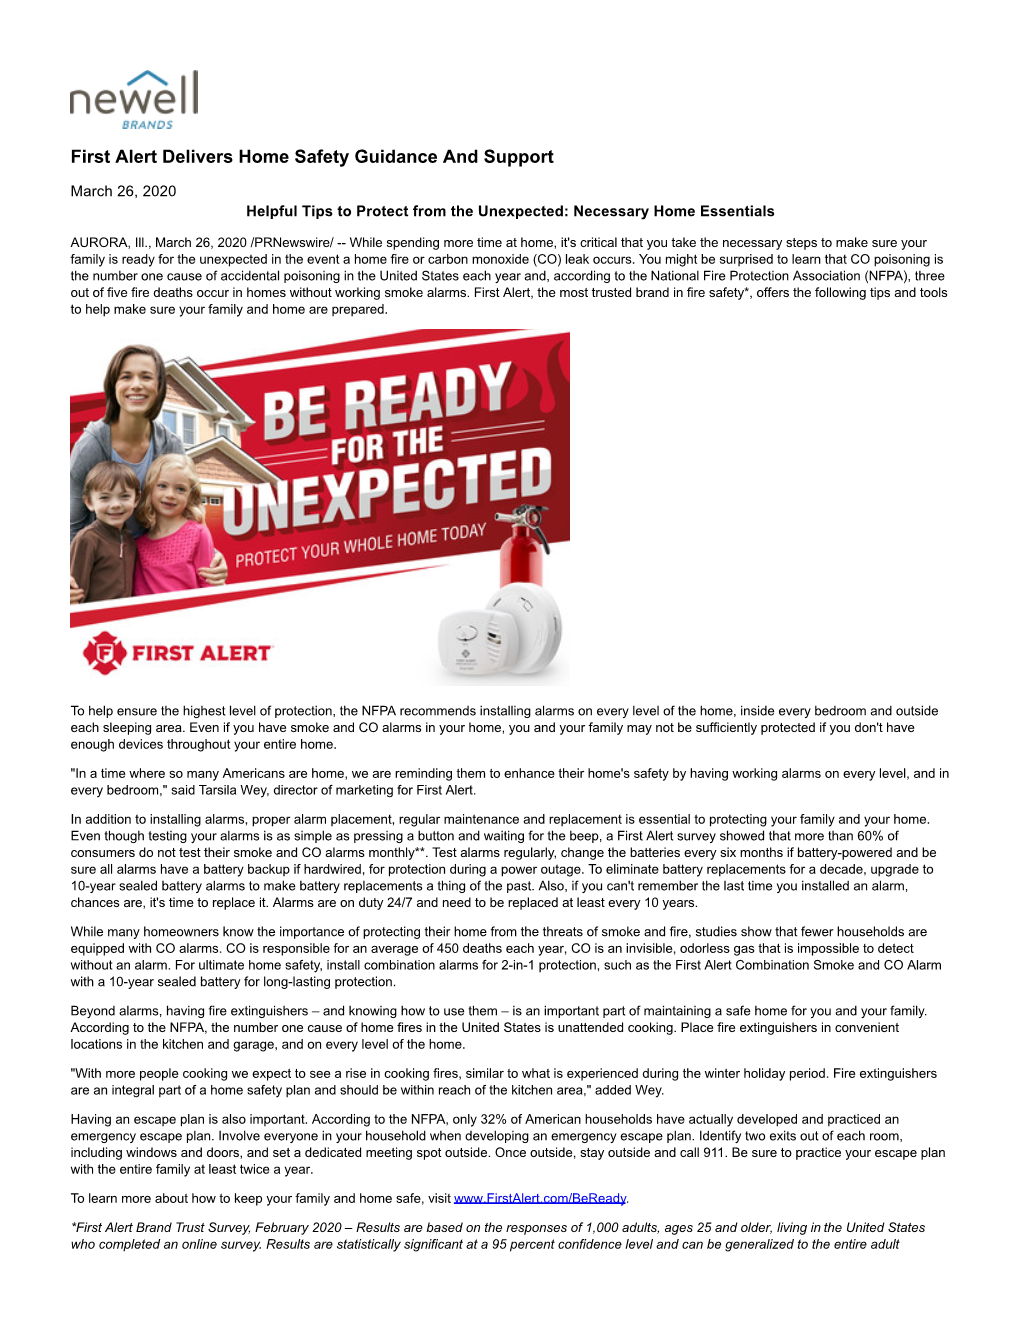 First Alert Delivers Home Safety Guidance and Support